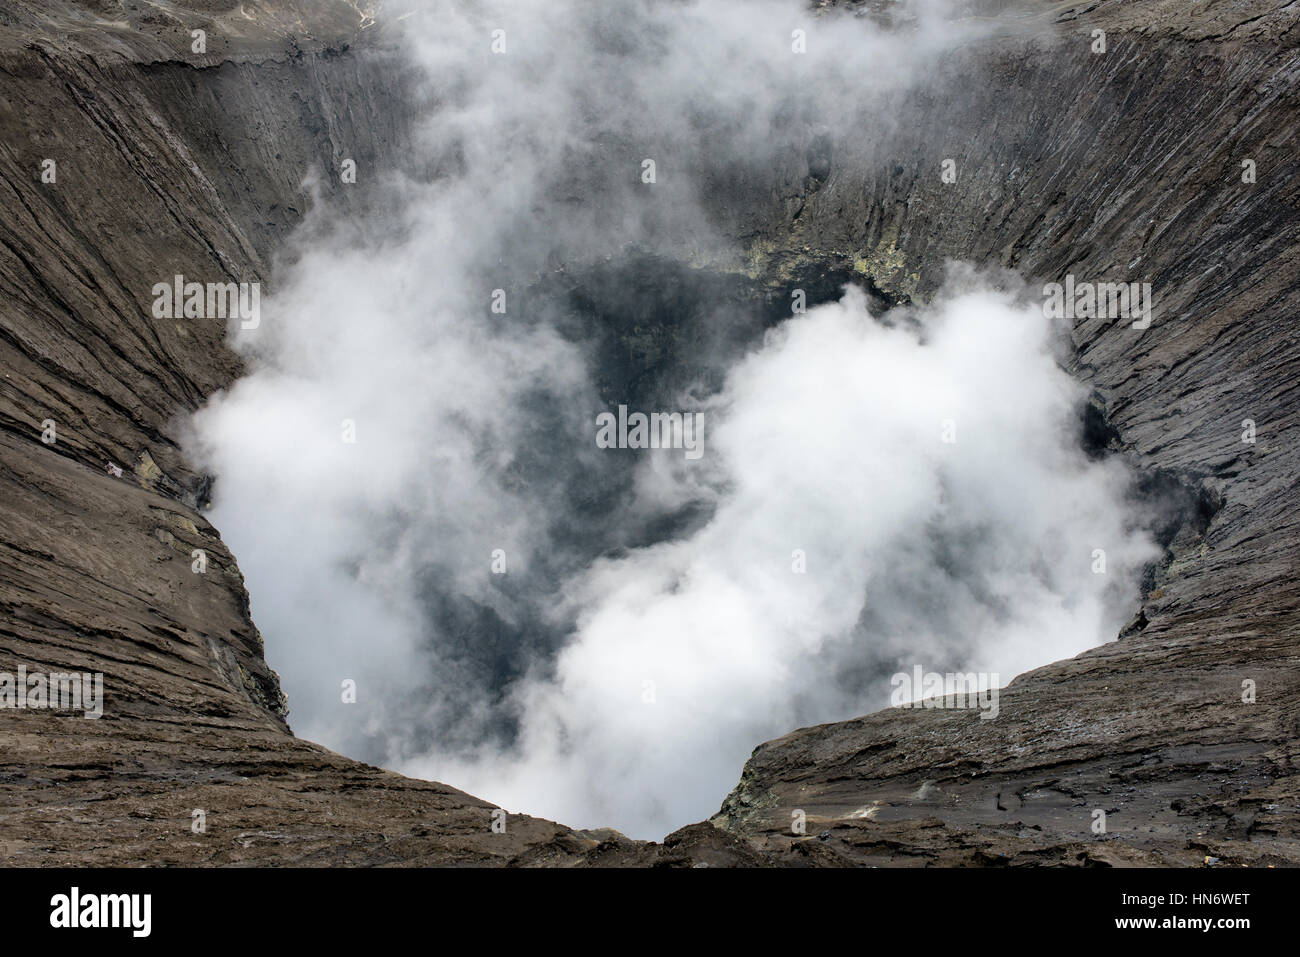 View inside the active volcano crater at Mt. Bromo, Tengger Semeru National Park, Indonesia Stock Photo